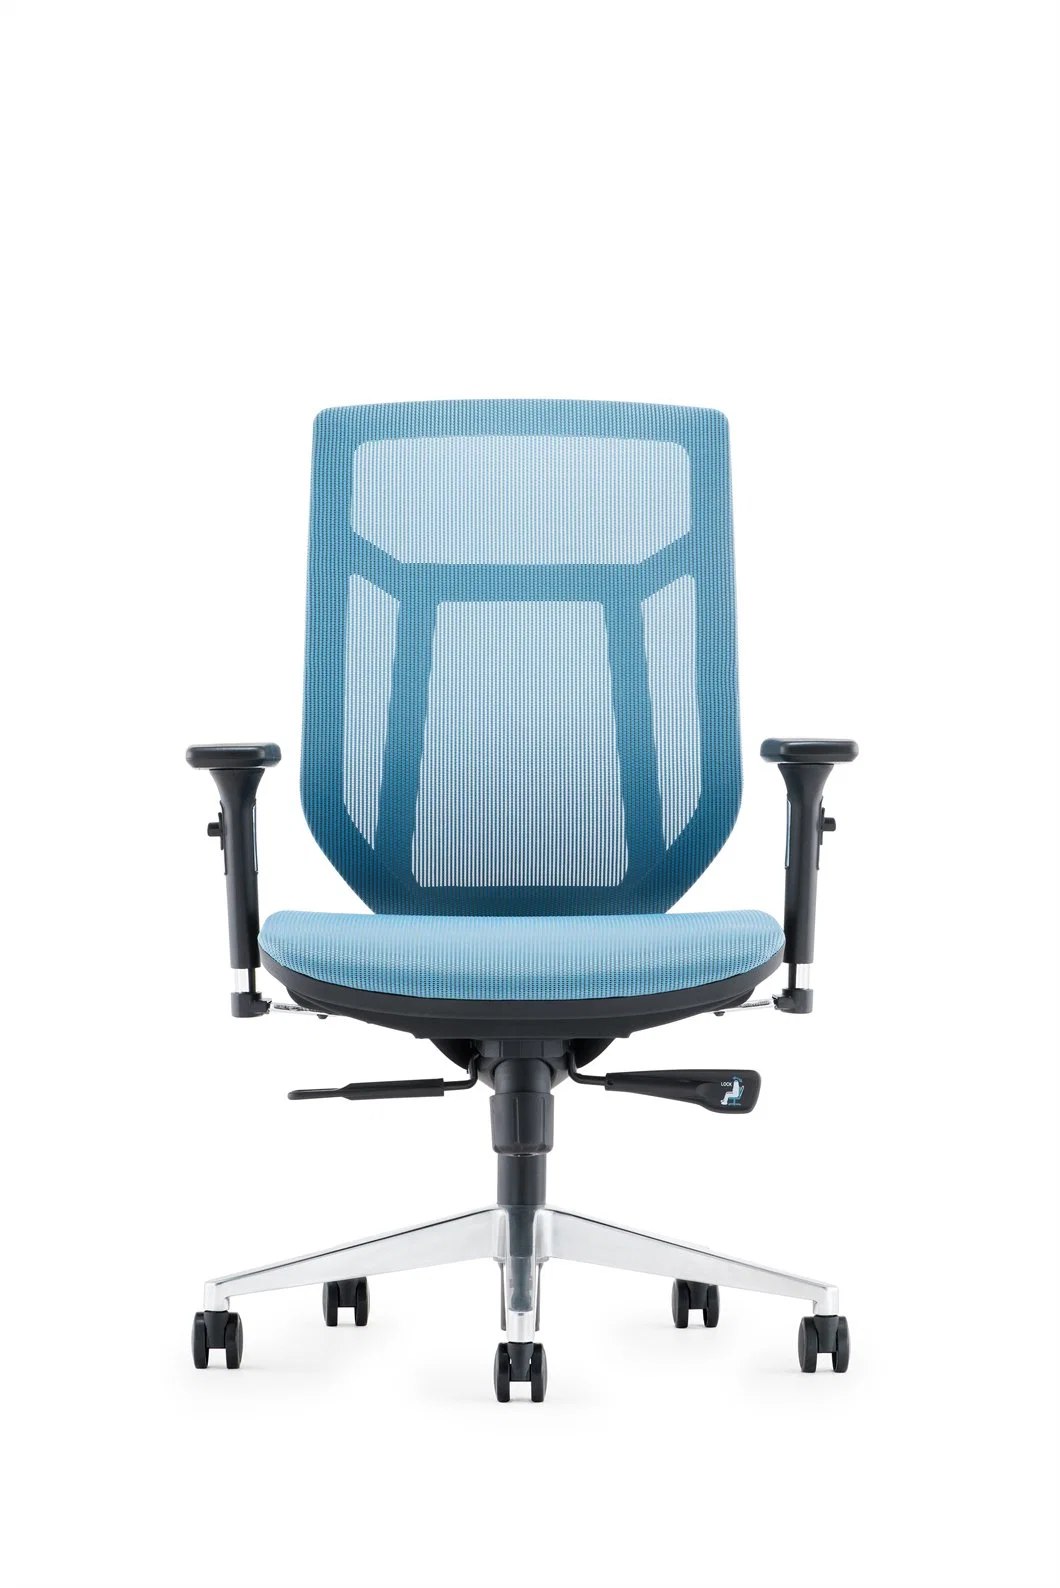 Special Mesh Ergonomic Mesh Fabric Office Chair Modern Computer Office Furniture Swivel Chairs with 3D Adjustable Armrest